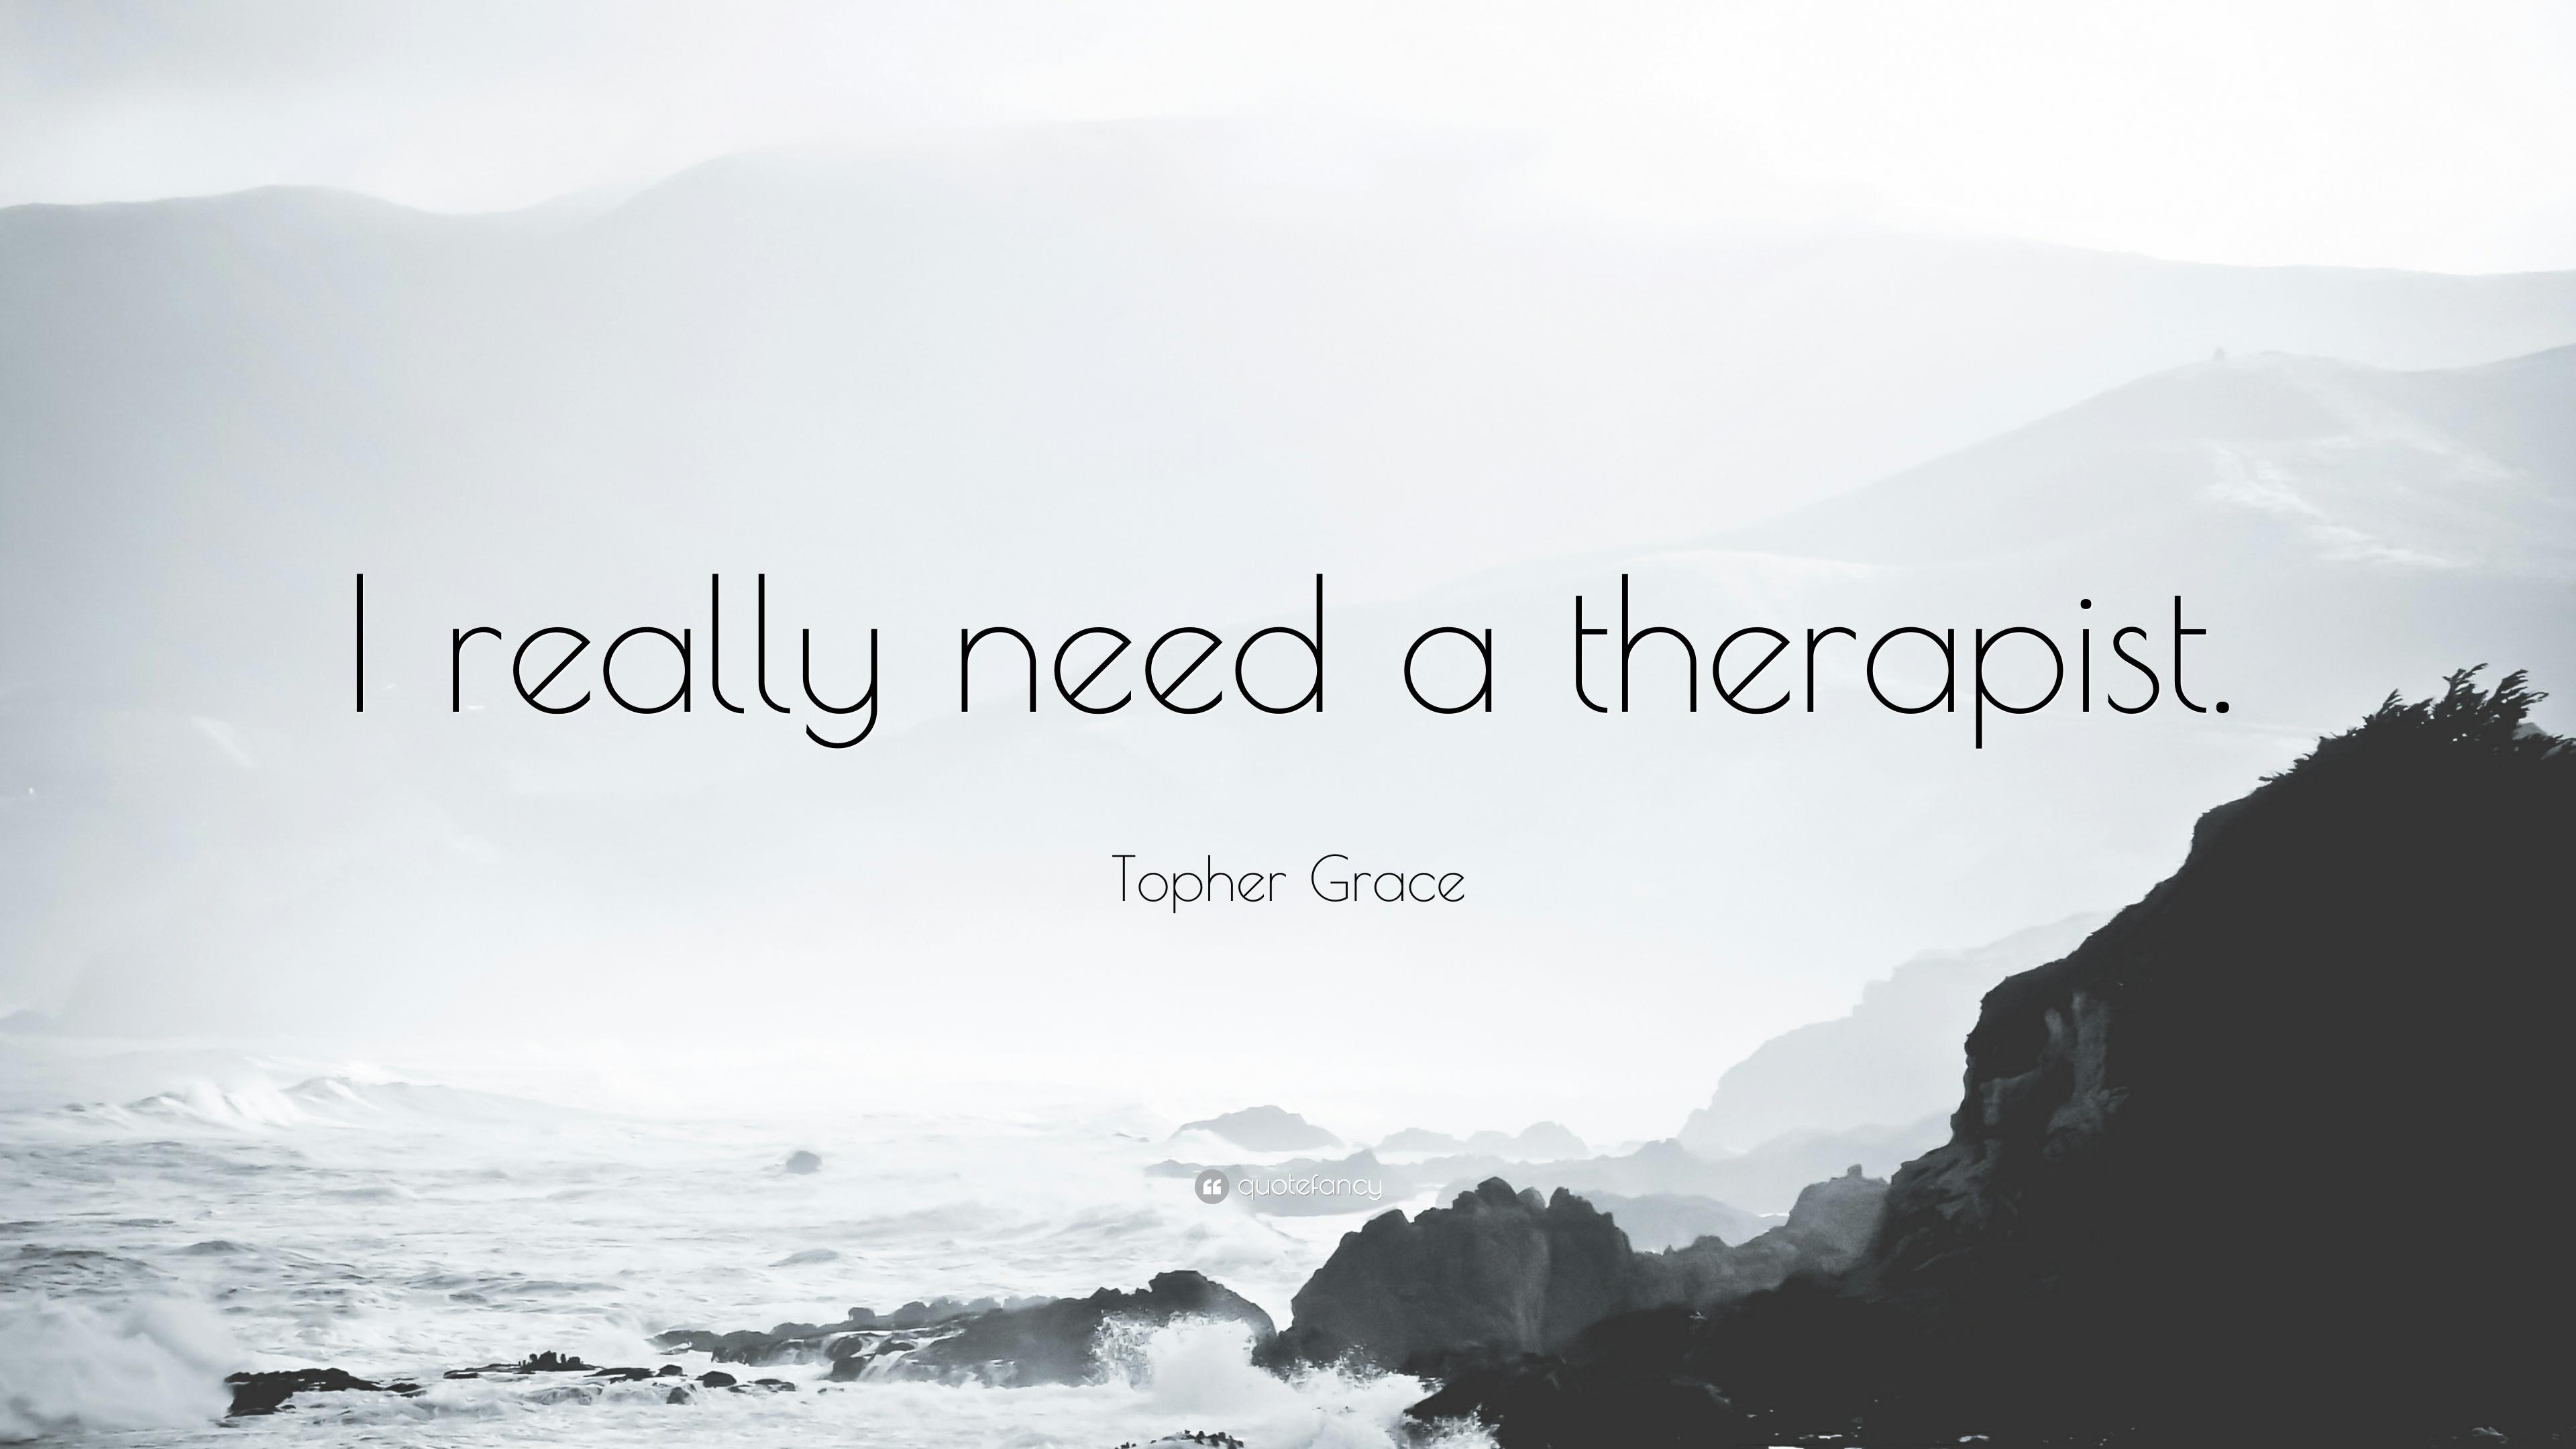 Topher Grace Quote: “I really need a therapist.”